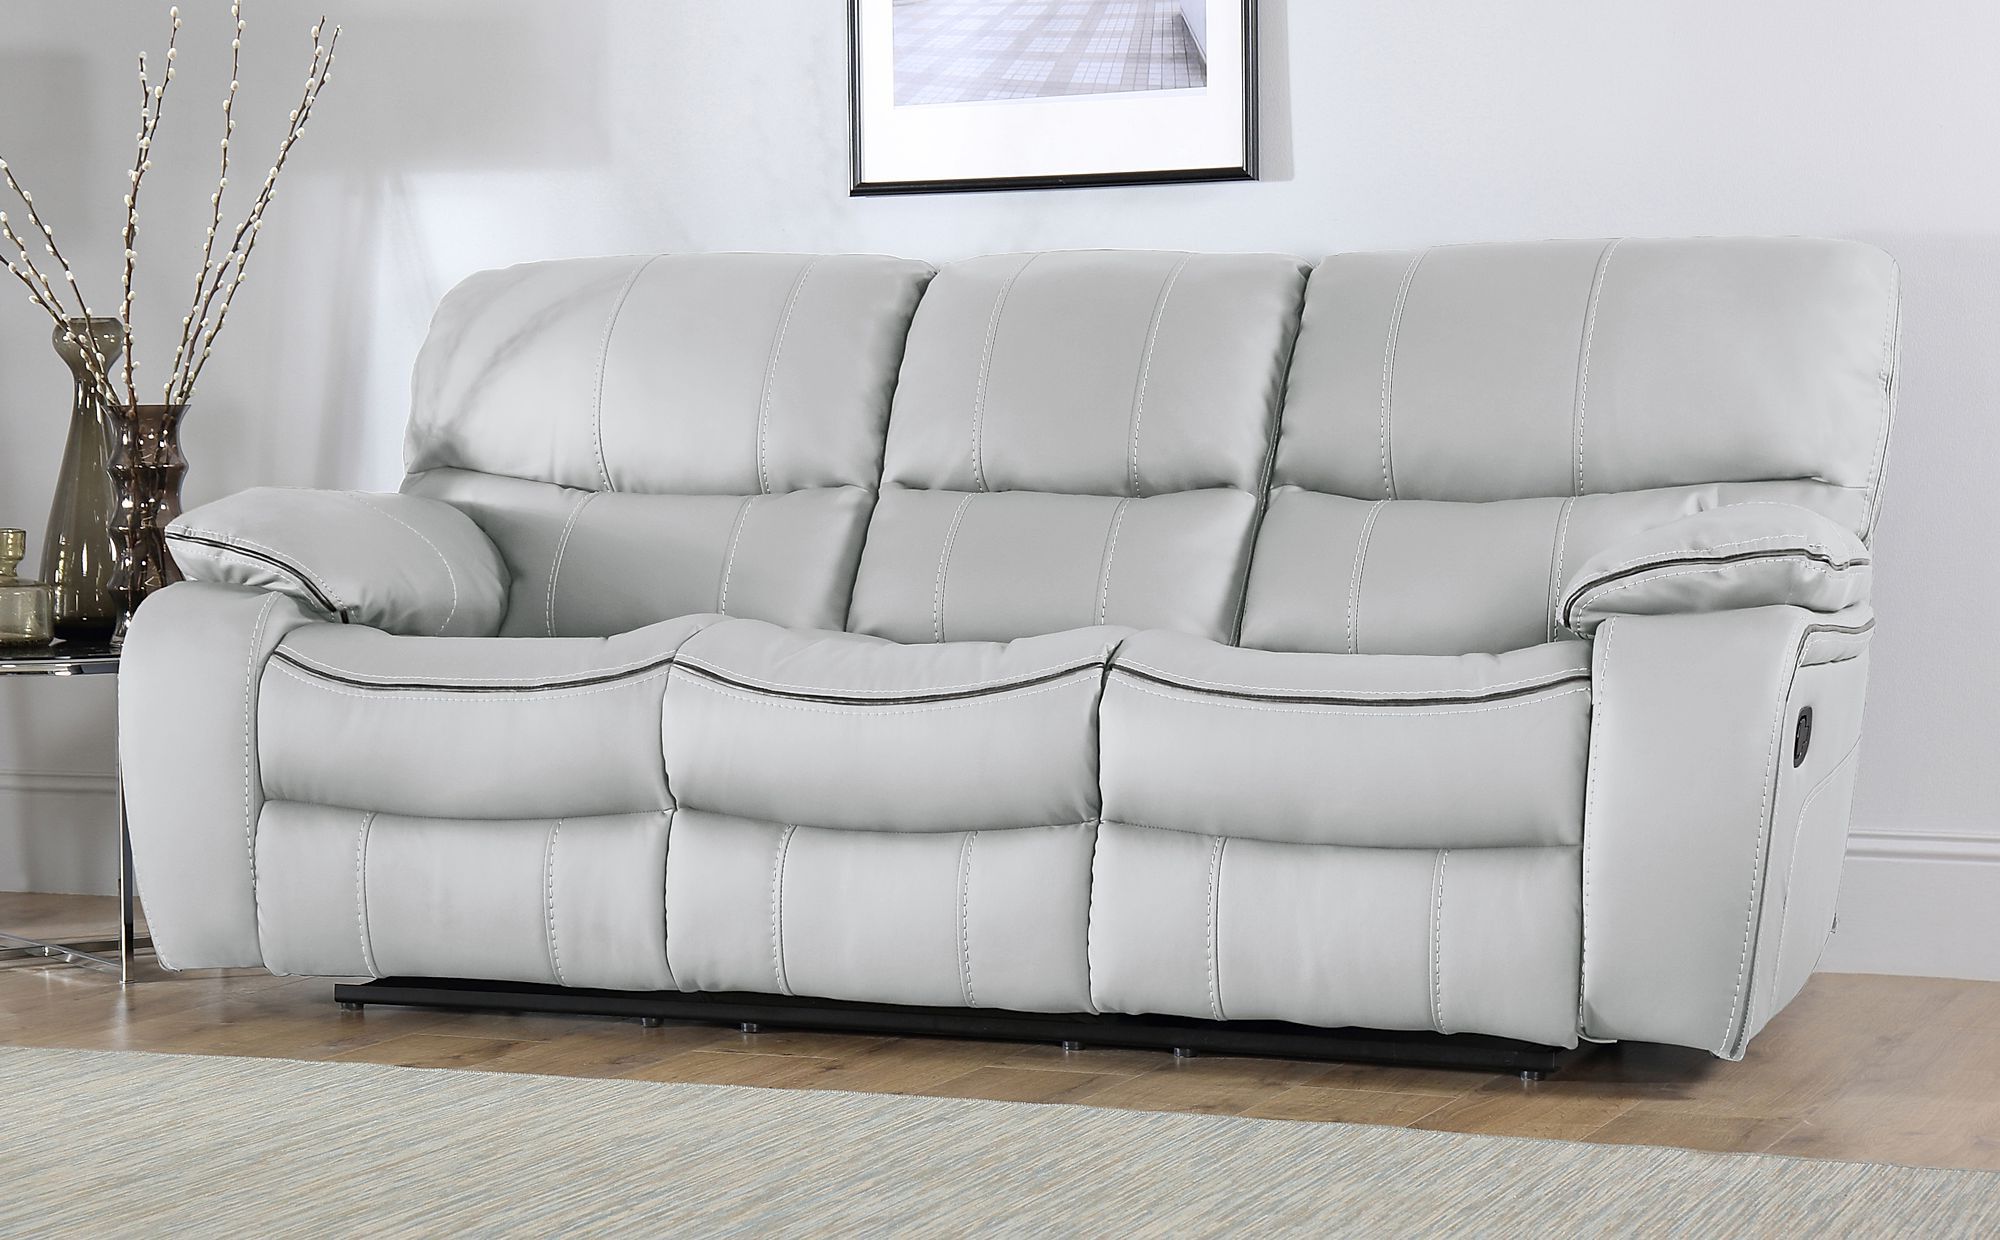 Beaumont Light Grey Leather 3 Seater Recliner Sofa | Furniture Choice Intended For Sofas In Light Gray (View 5 of 20)